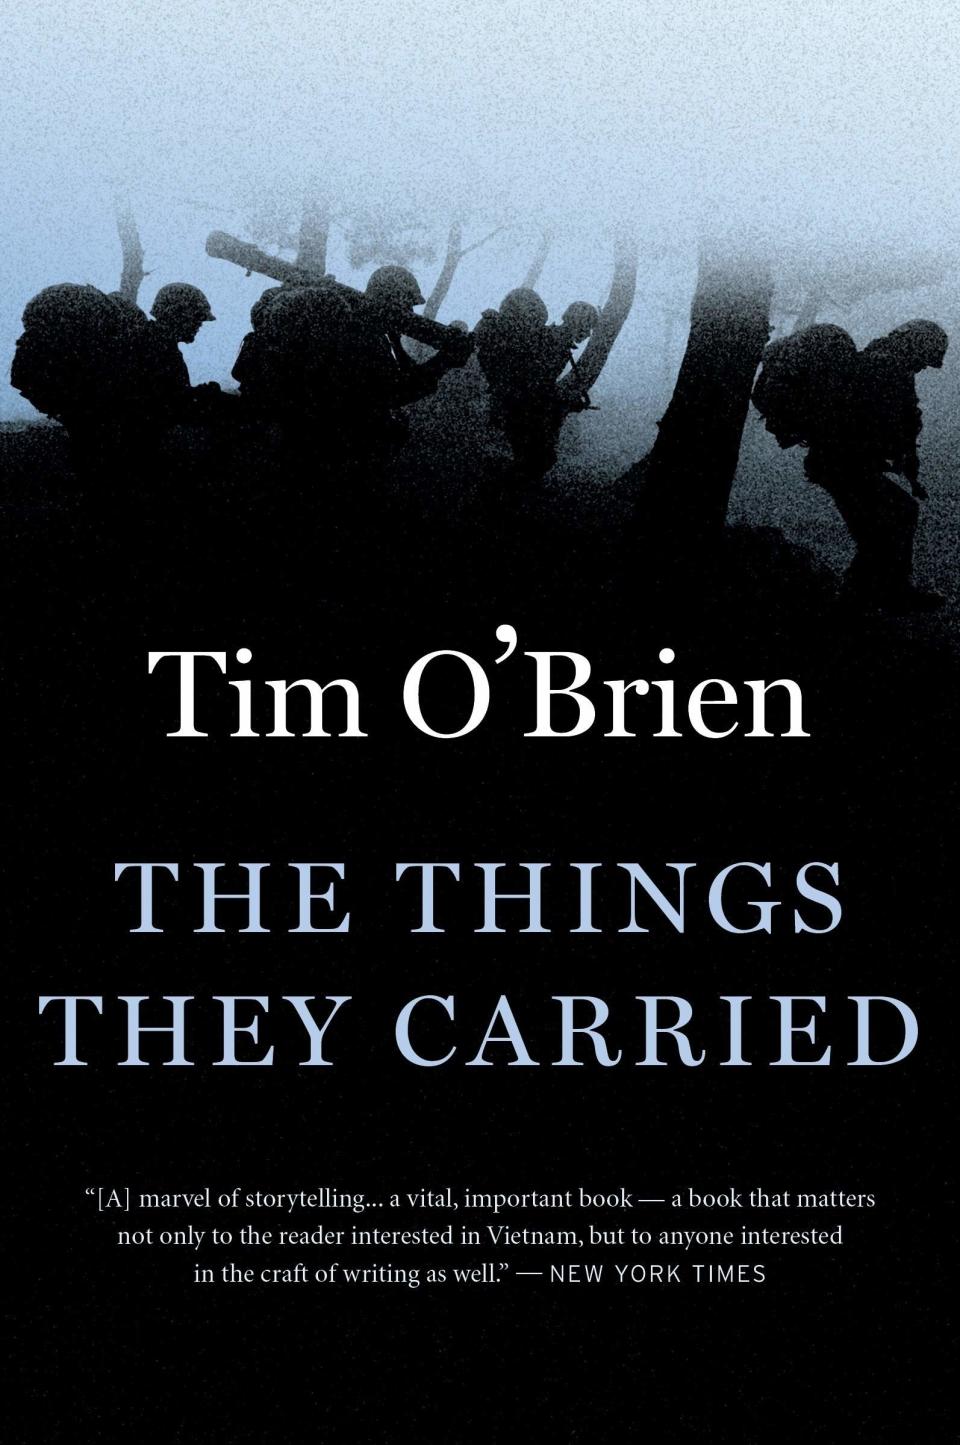 "The Things They Carried" by Tim O'Brien.